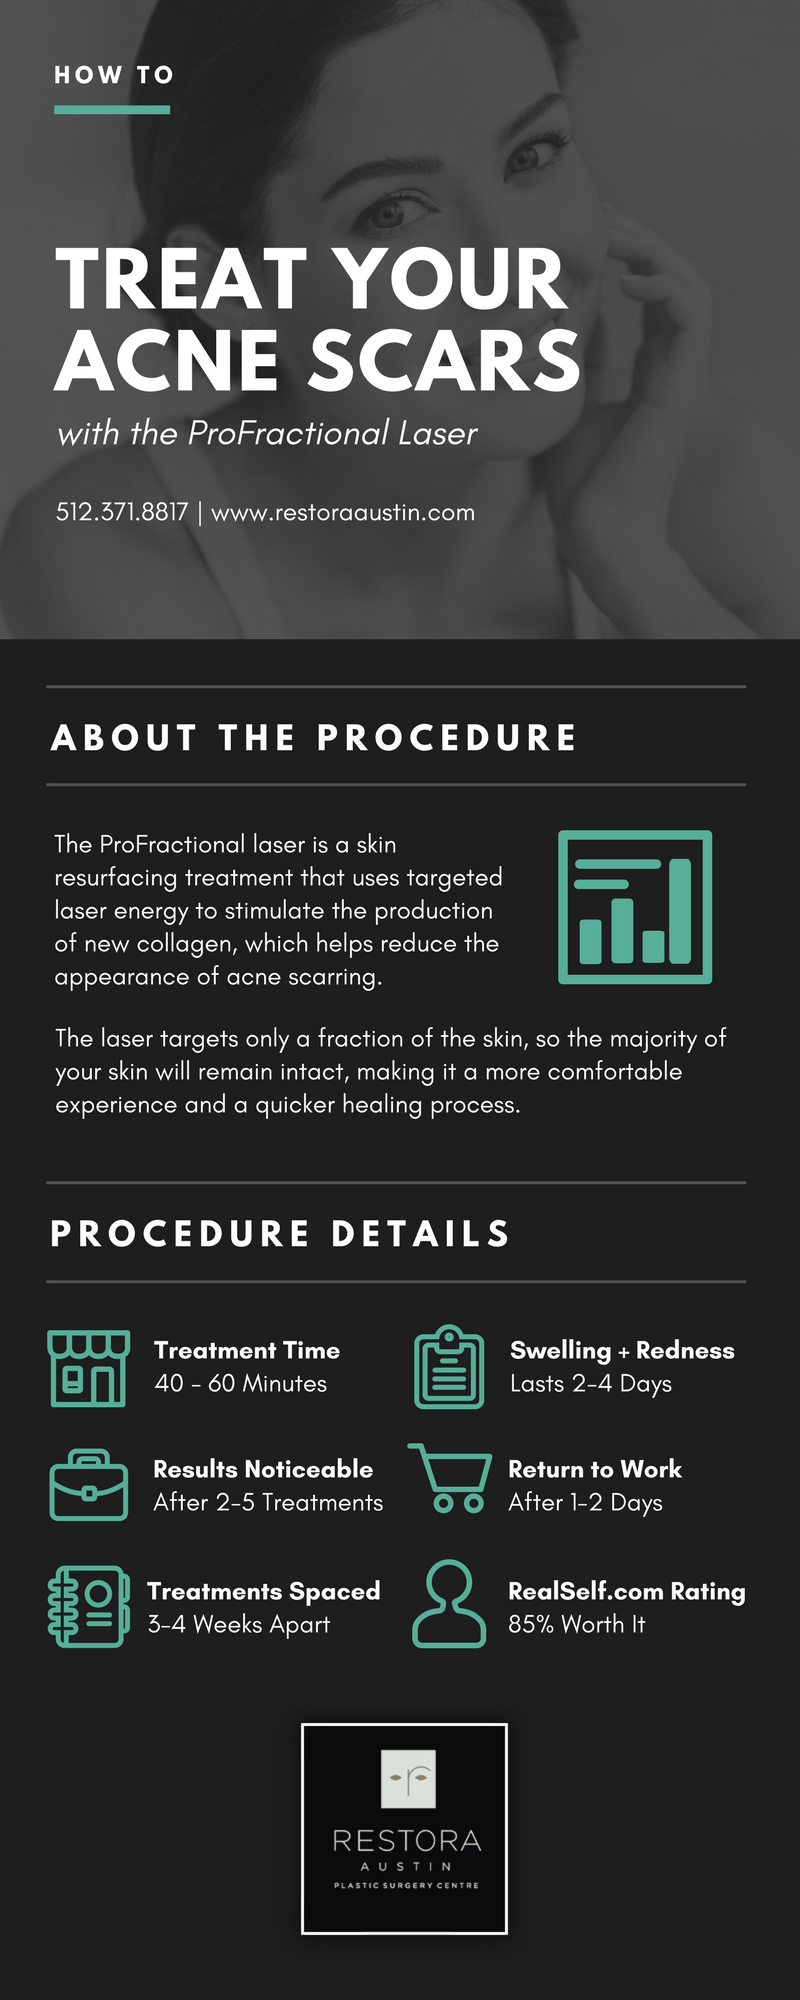 Treat Your Acne Scars with ProFractional Laser